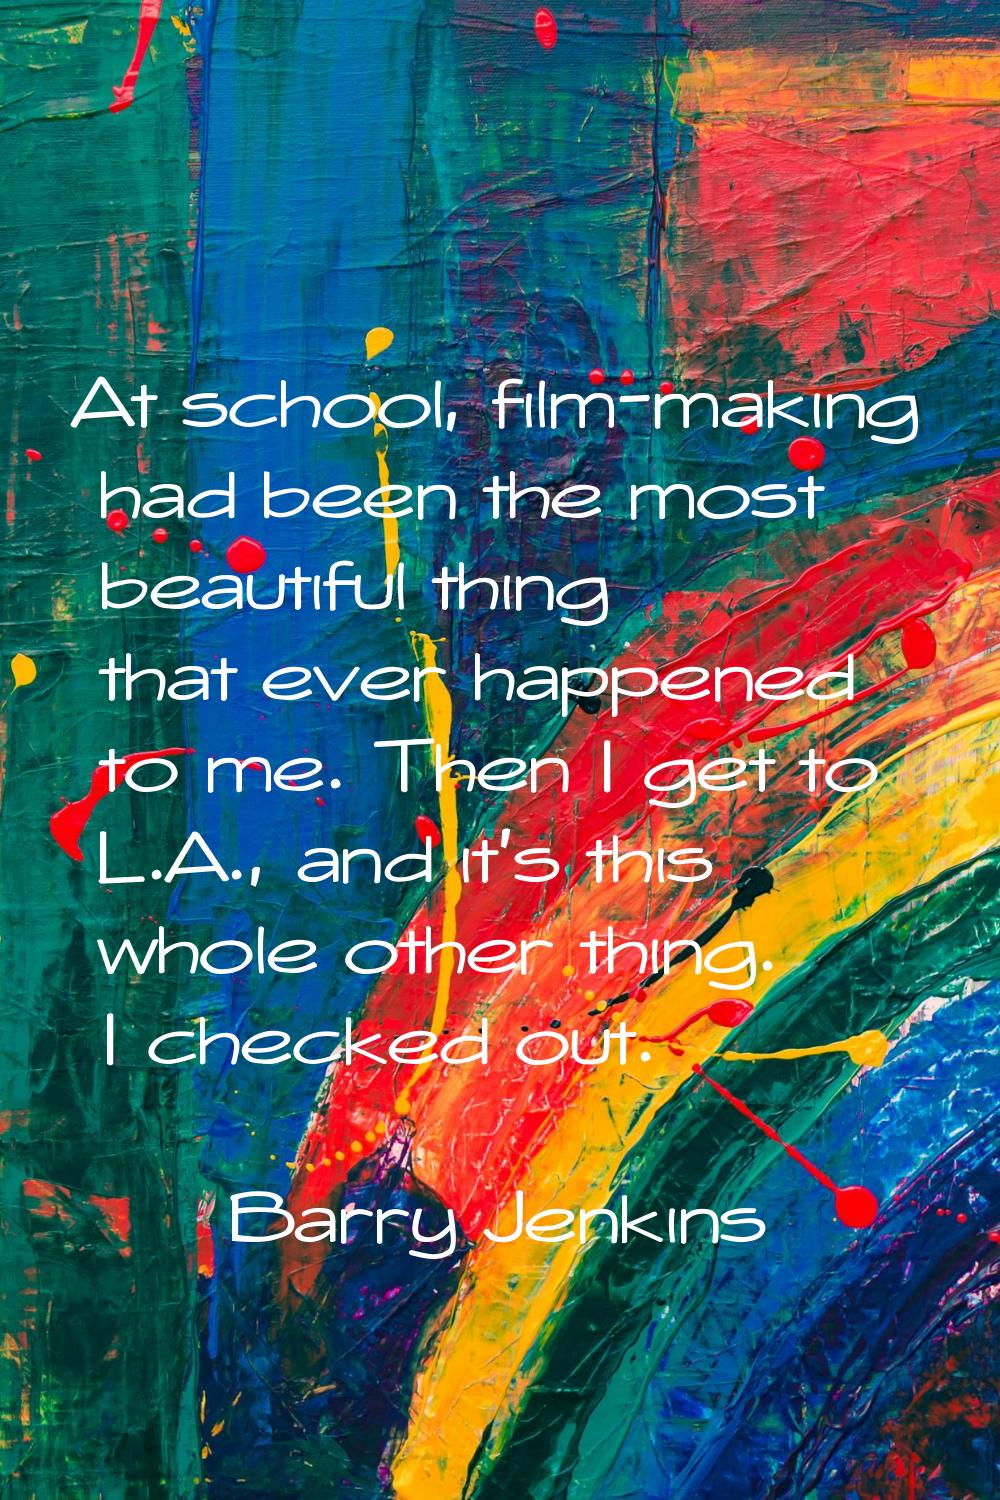 At school, film-making had been the most beautiful thing that ever happened to me. Then I get to L.